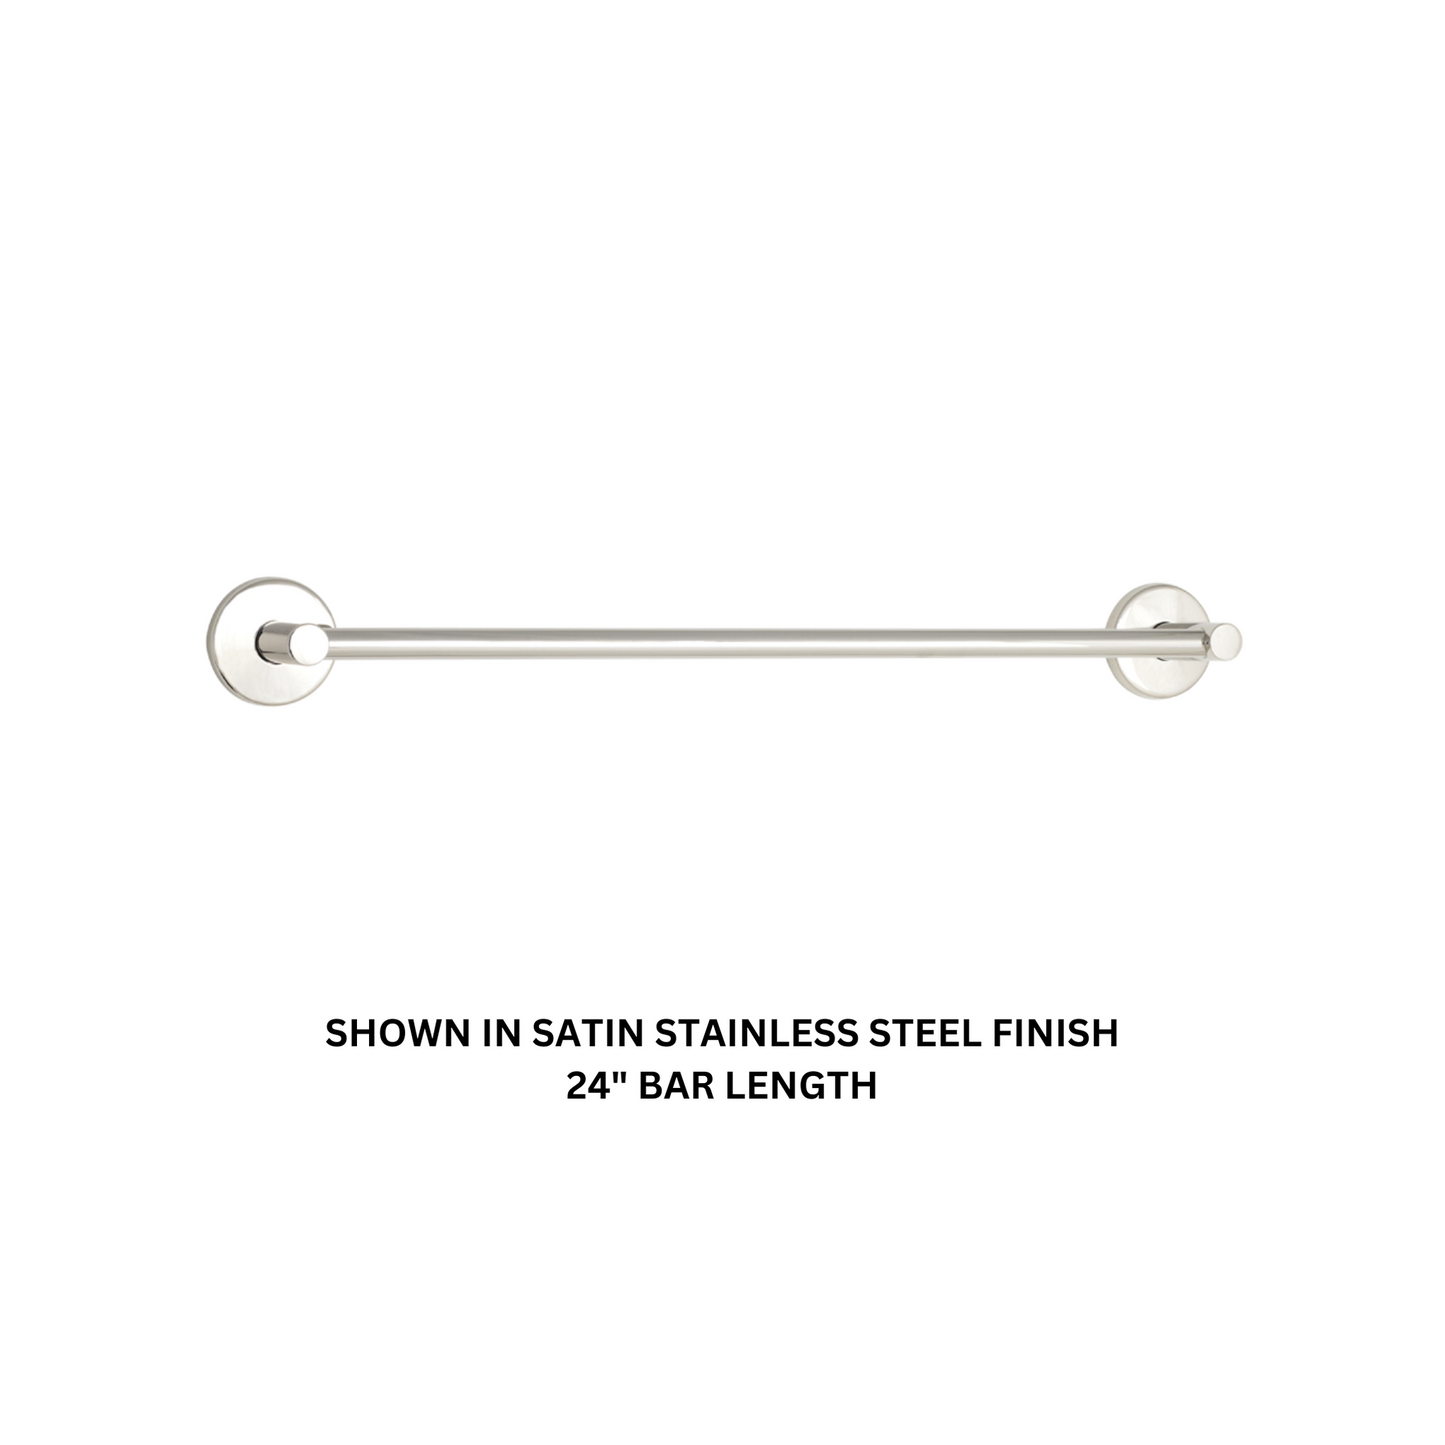 Seachrome Conorado Series 18" Biscuit Powder Coat Concealed Mounting Flange Single Towel Bar